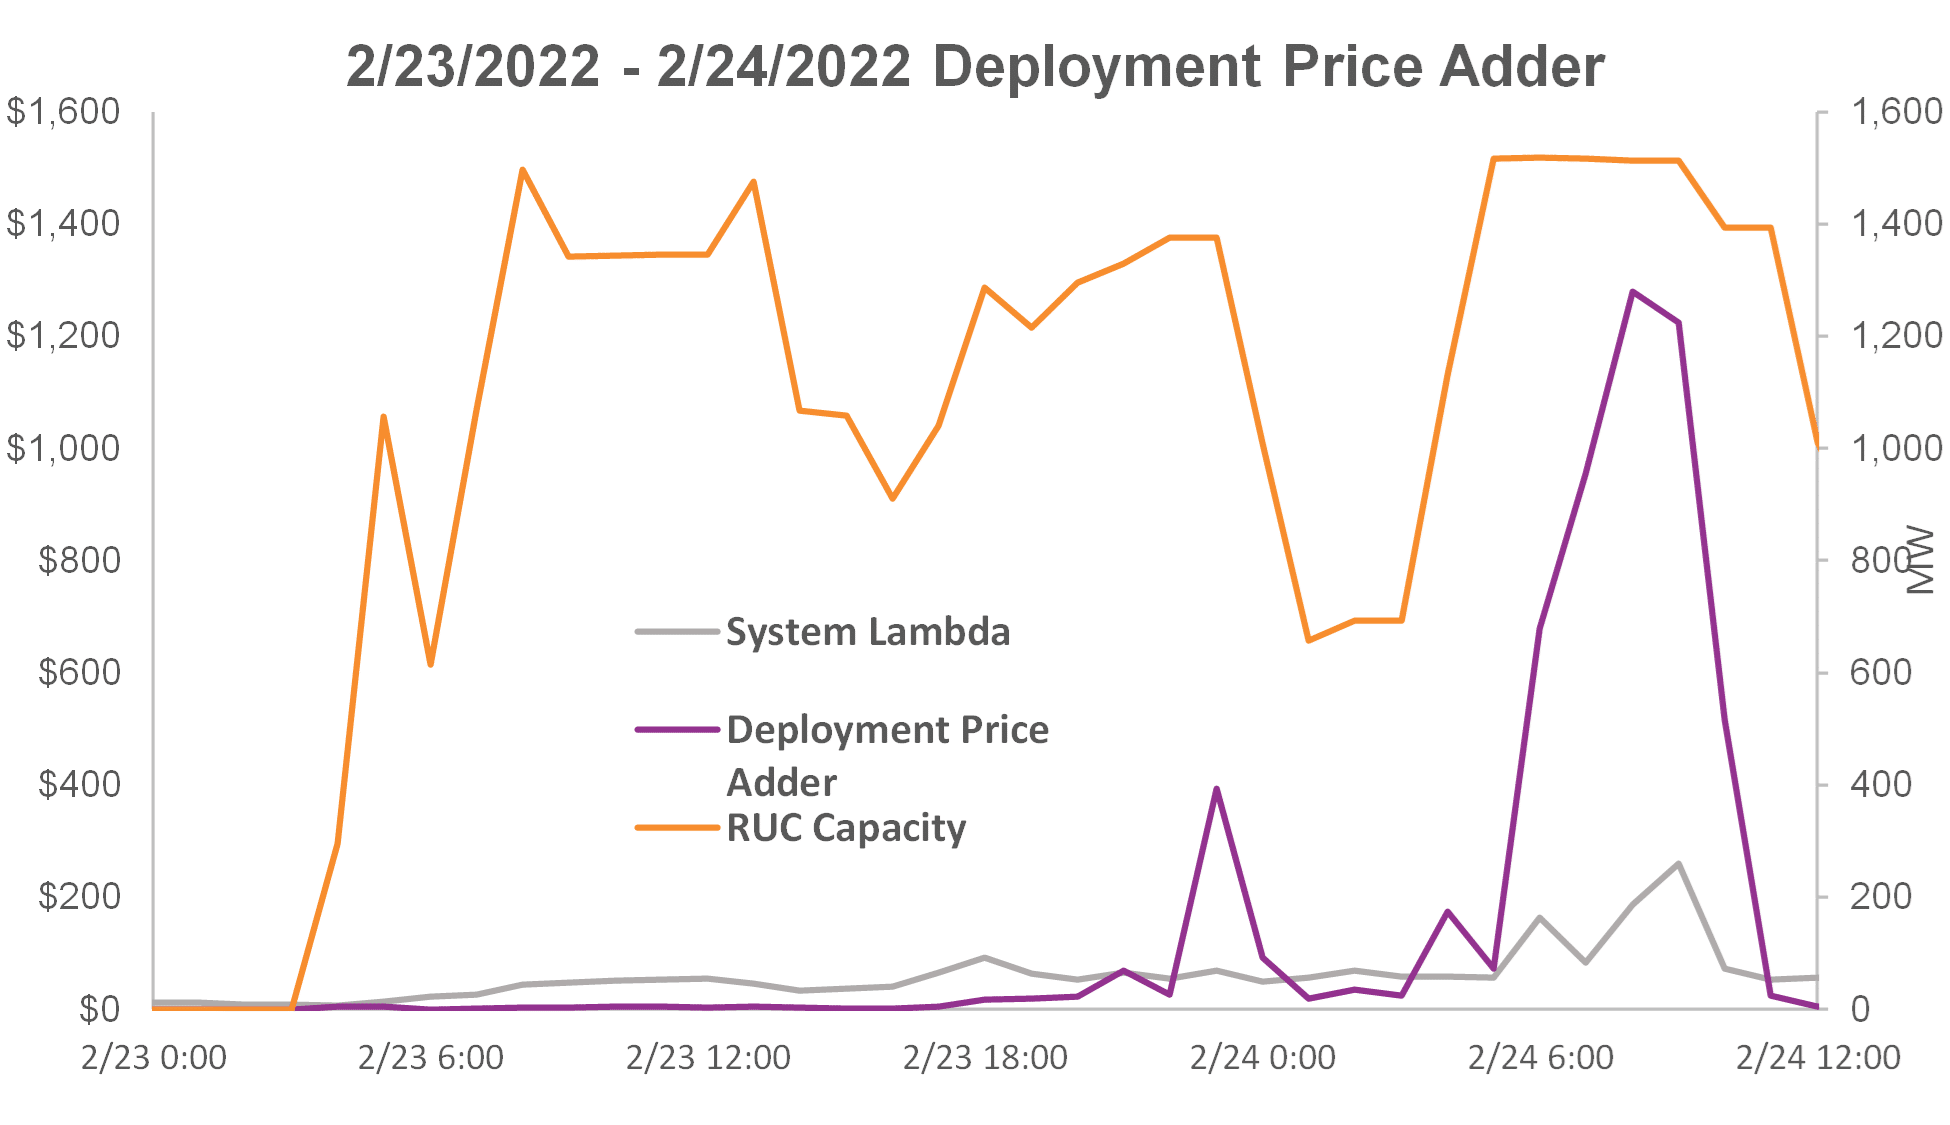 Graph showing Deployment Price Adder for Feb 23-24